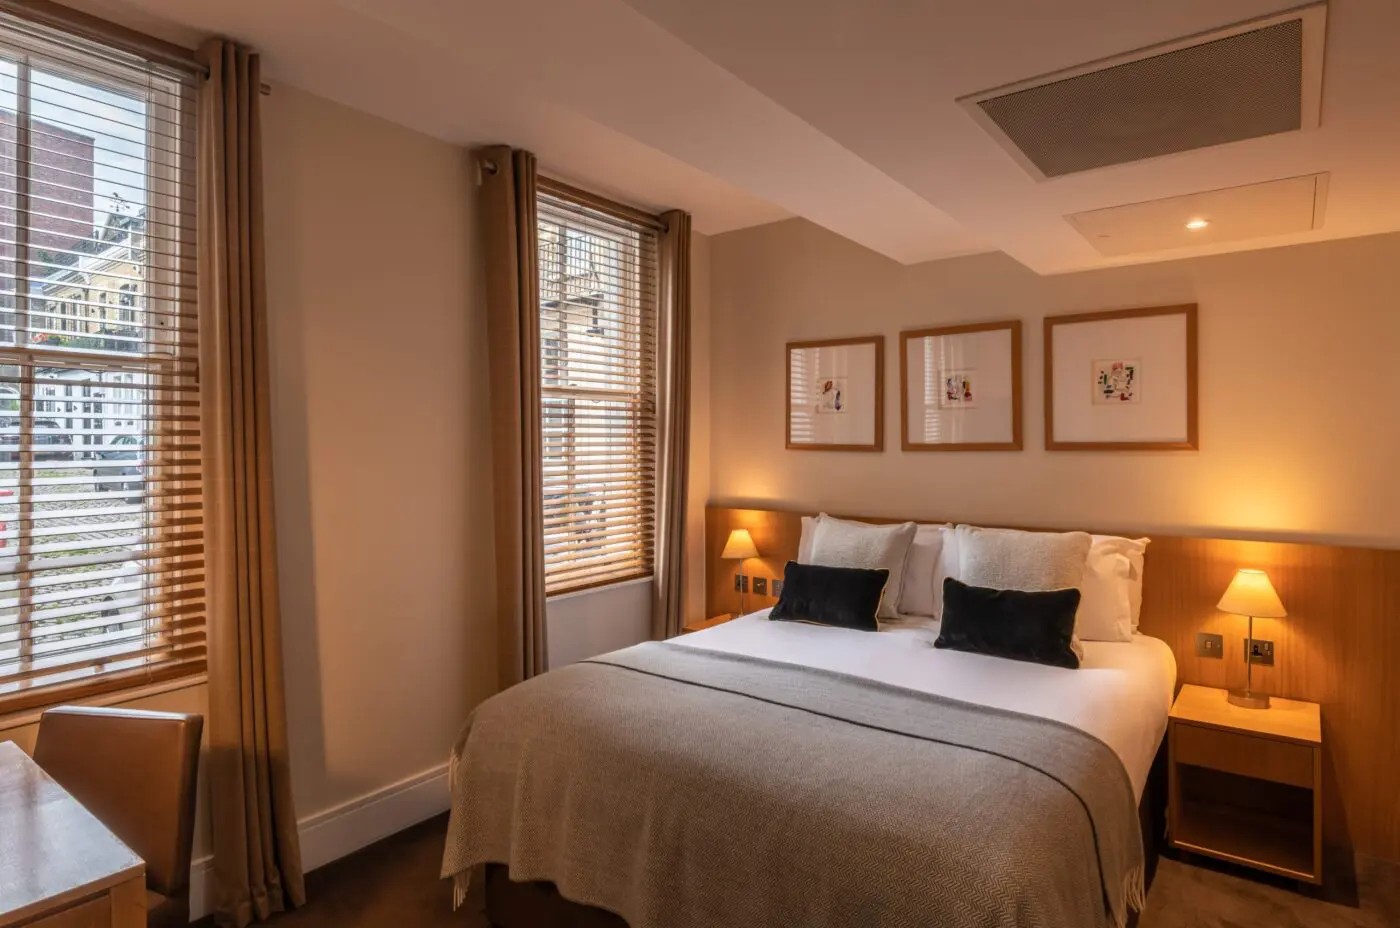 A large bedroom, with a double bed, bedside tables and desk, located in Kensington.